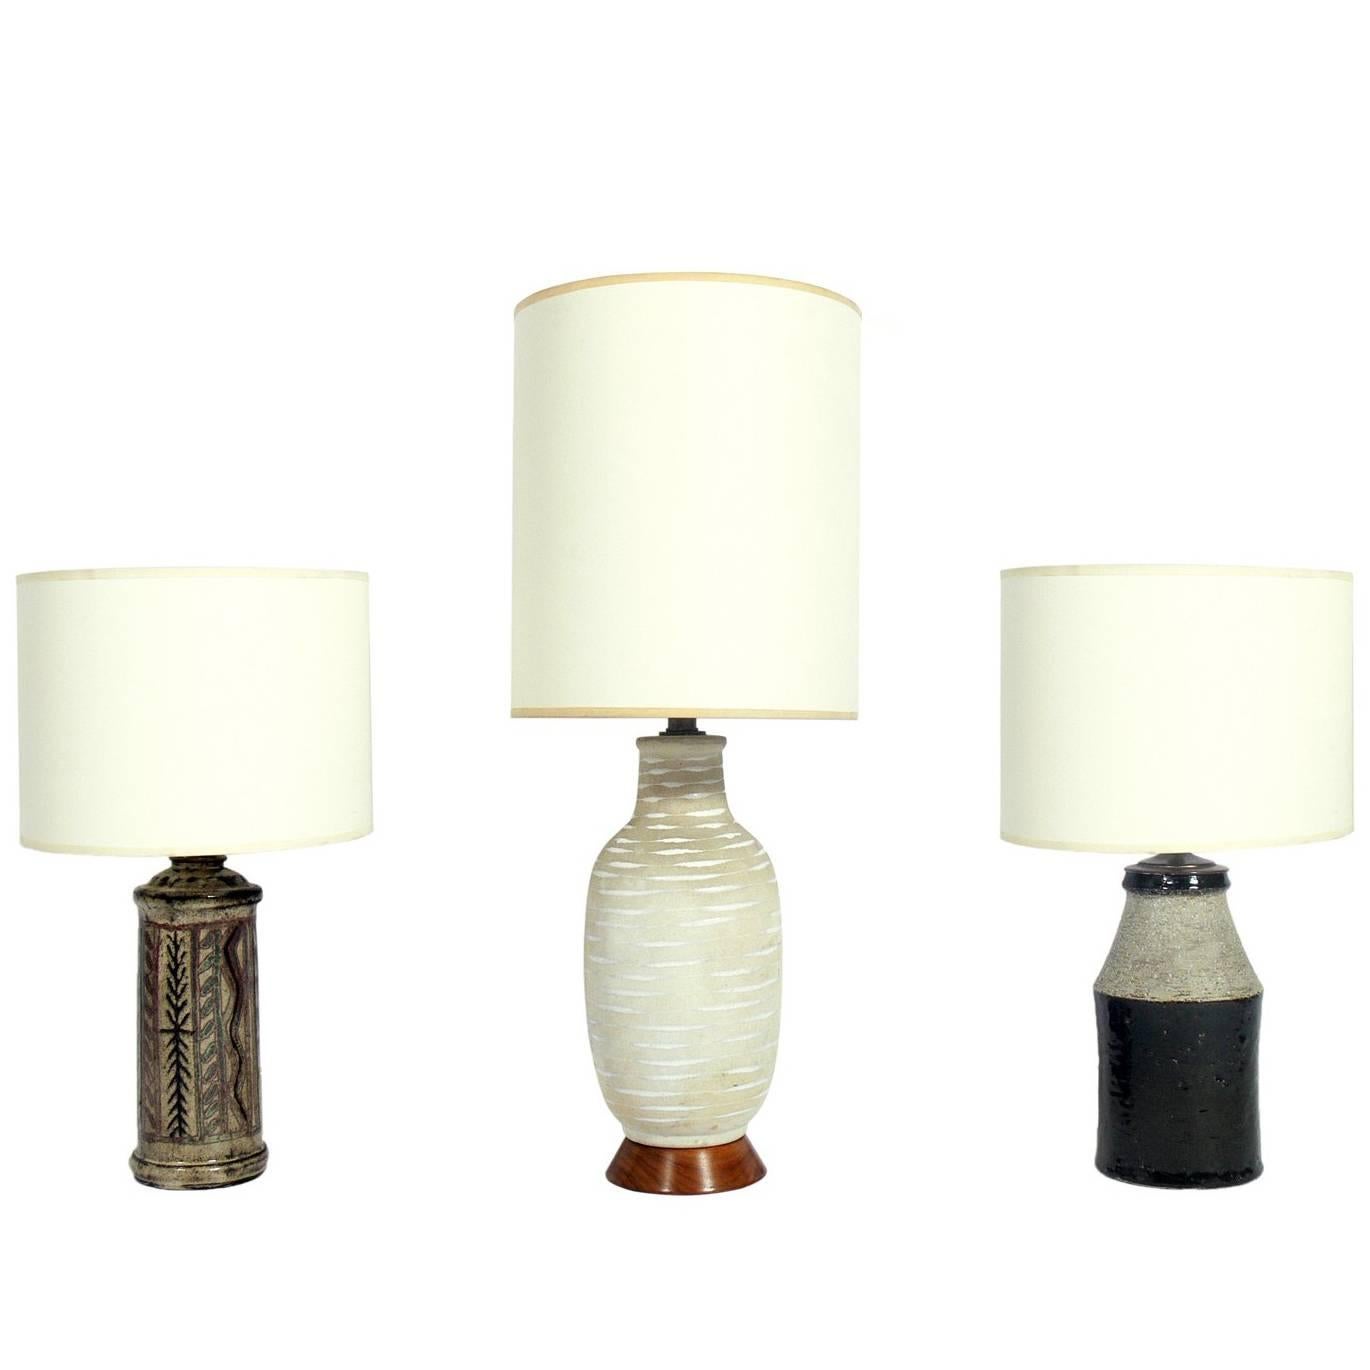 Selection of Mid-Century Modern Ceramic Lamps For Sale